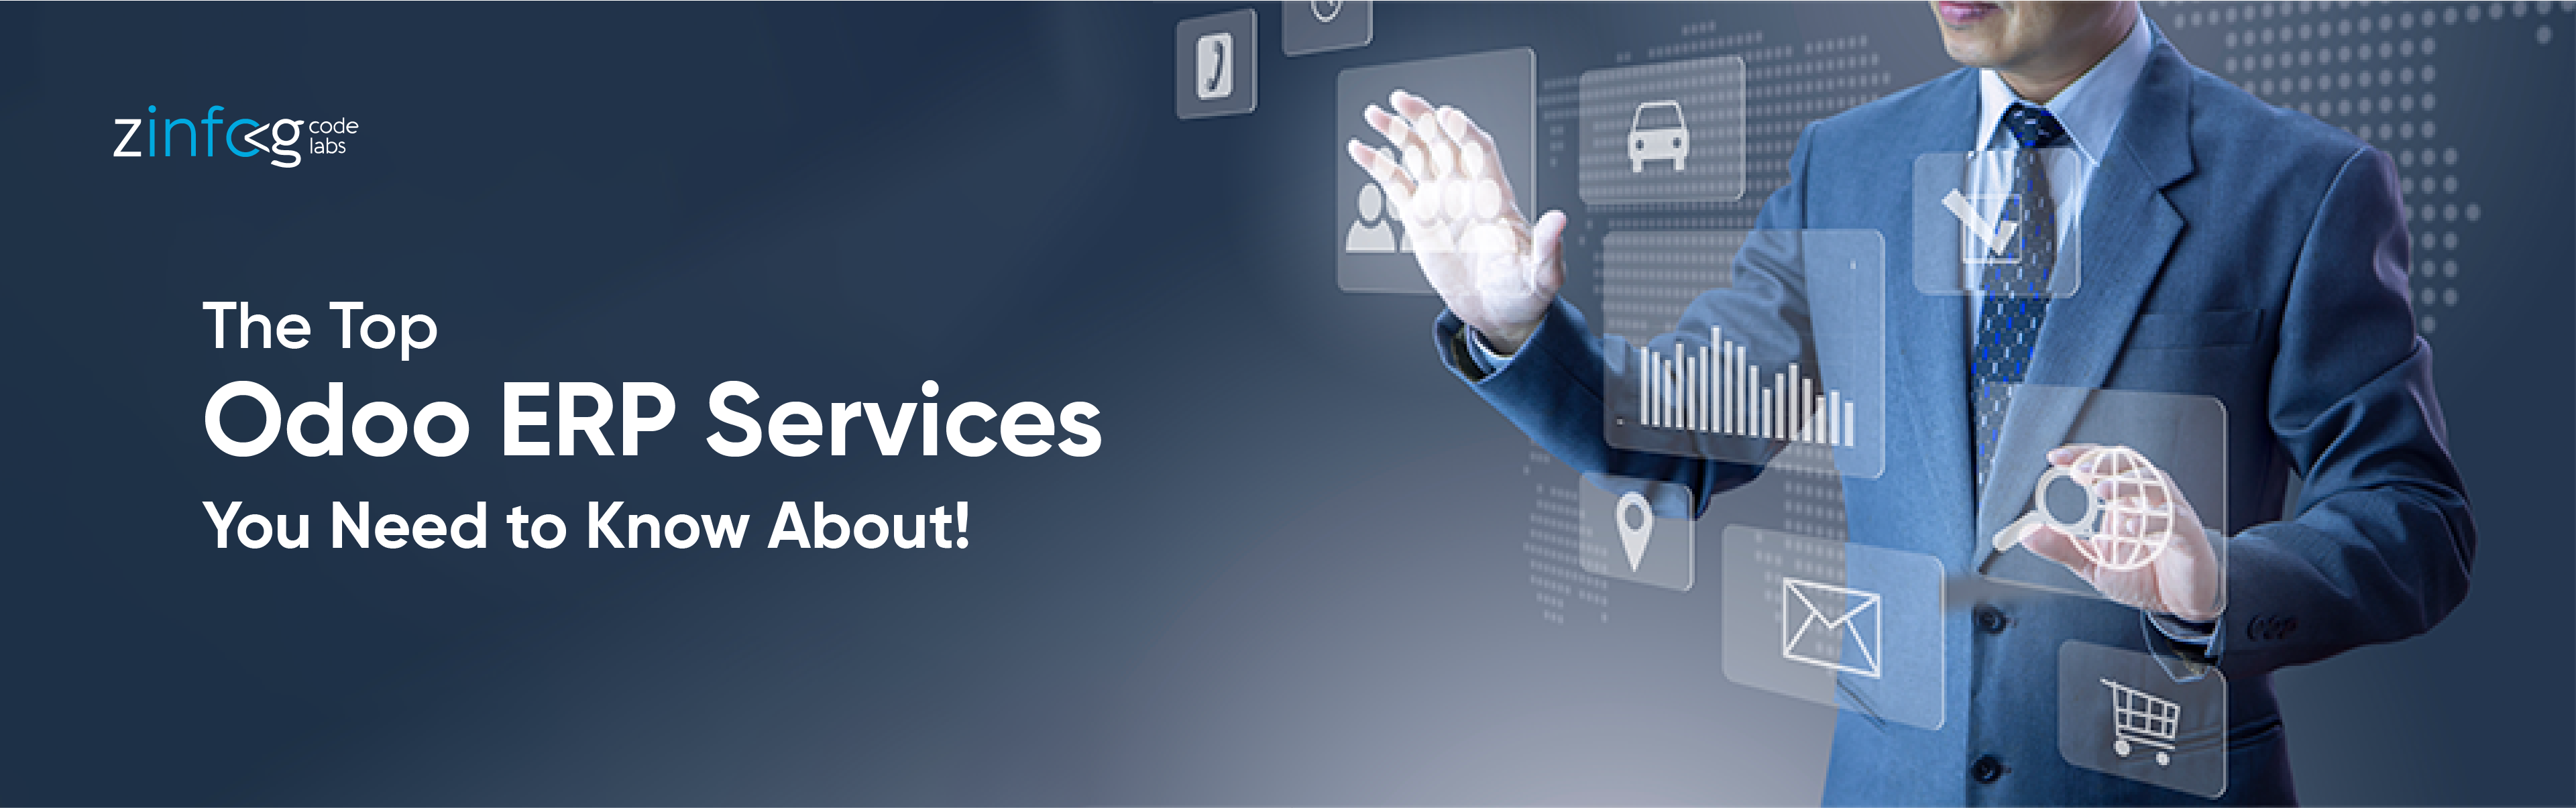 the-top-odoo-erp-services-you-need-to-know-about.html